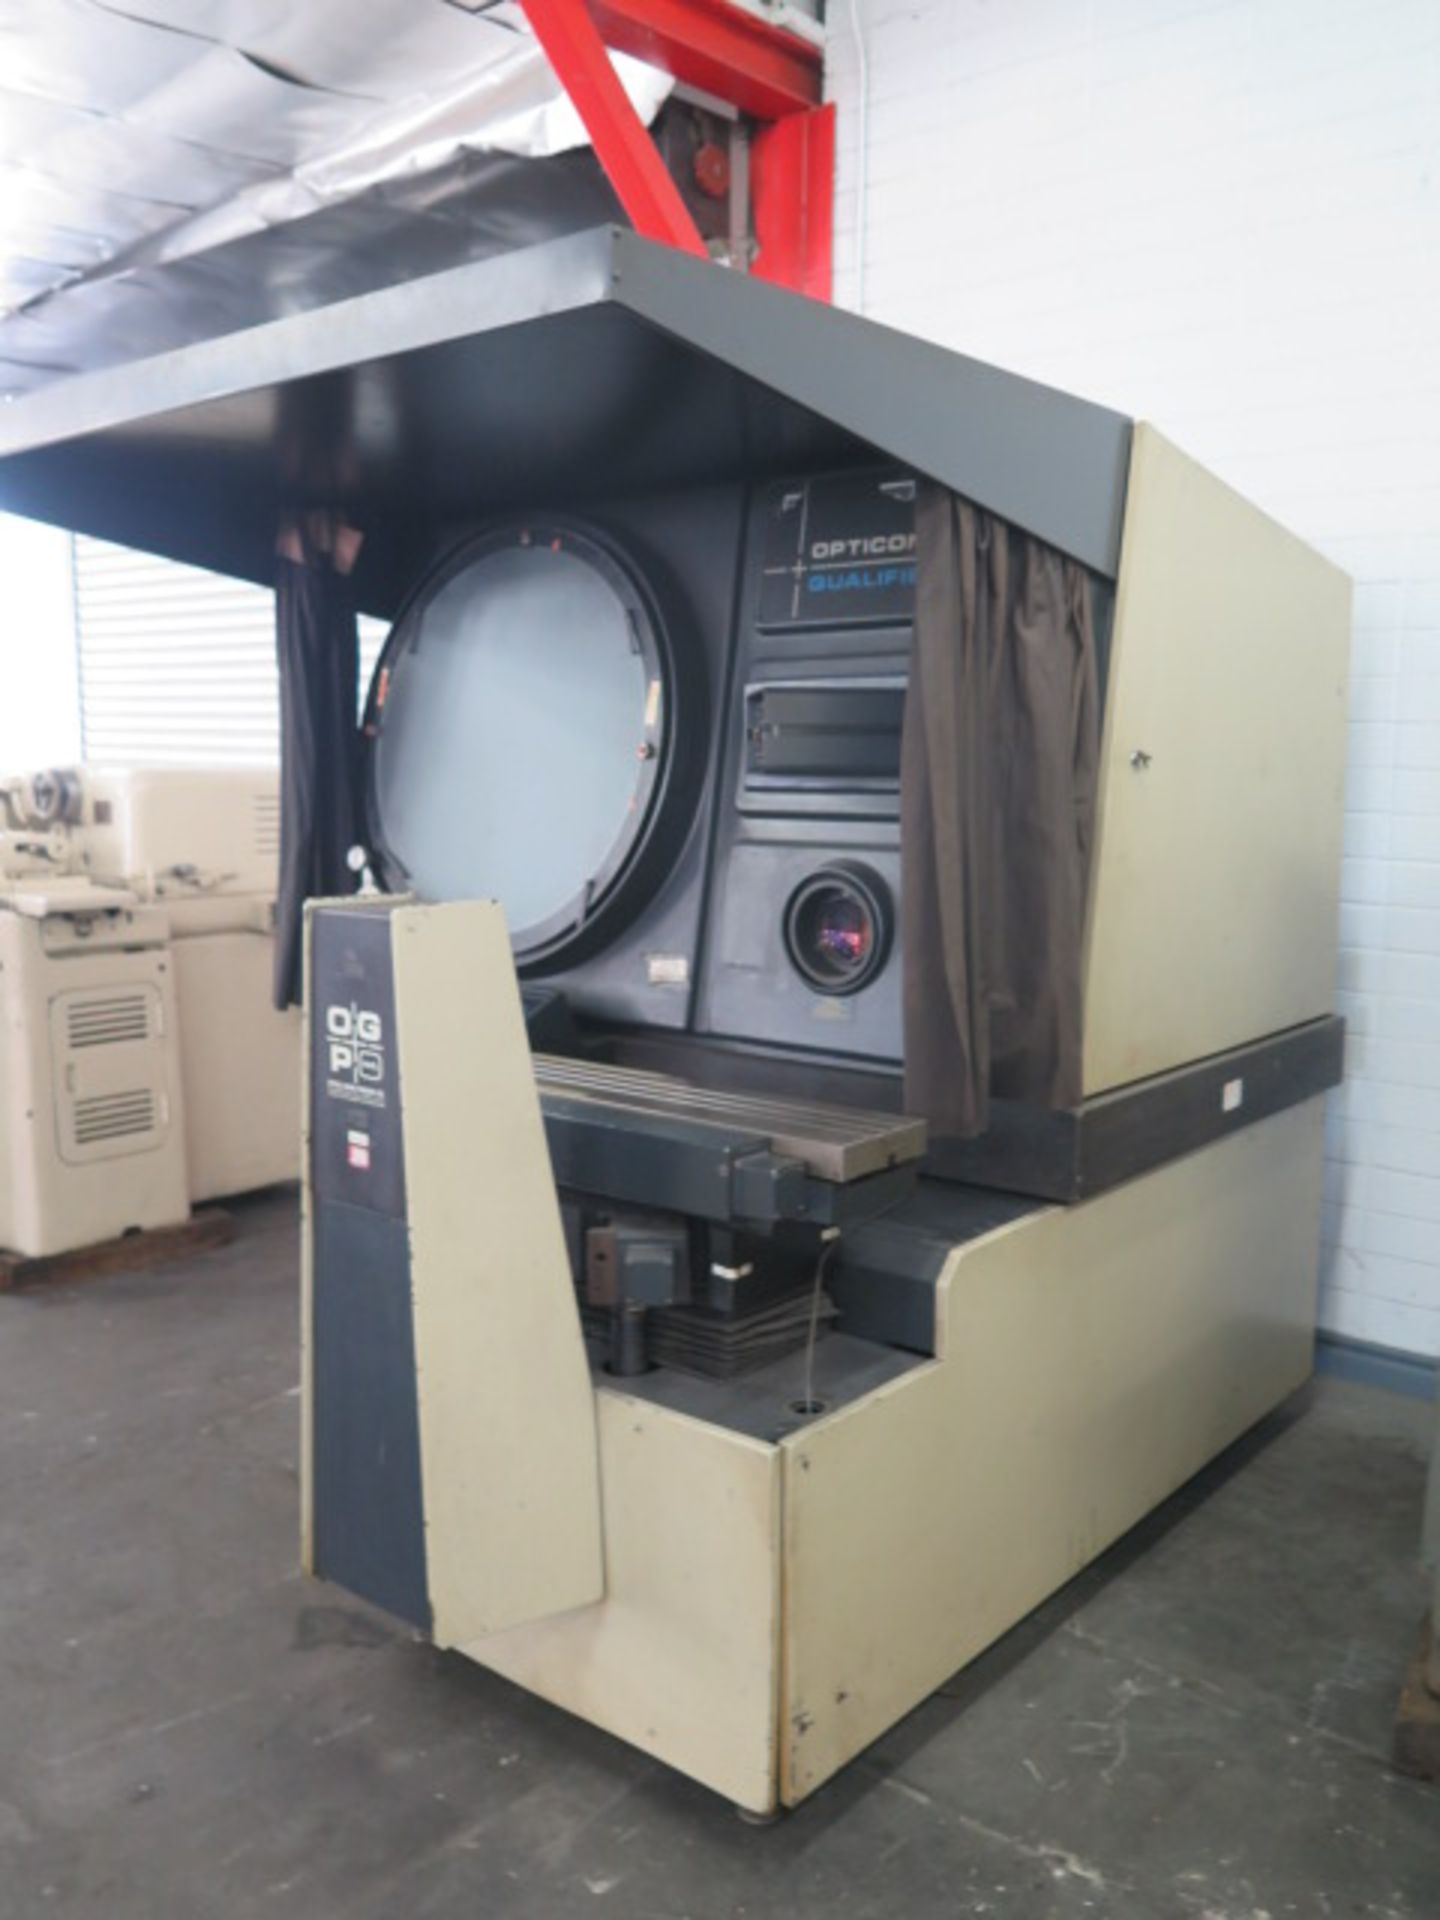 OGP Optical Gaging Co. “Opticon Qualifier 30” mdl. 0030S 30” Optical Comparator s/n 00300-340 w/ - Image 3 of 13